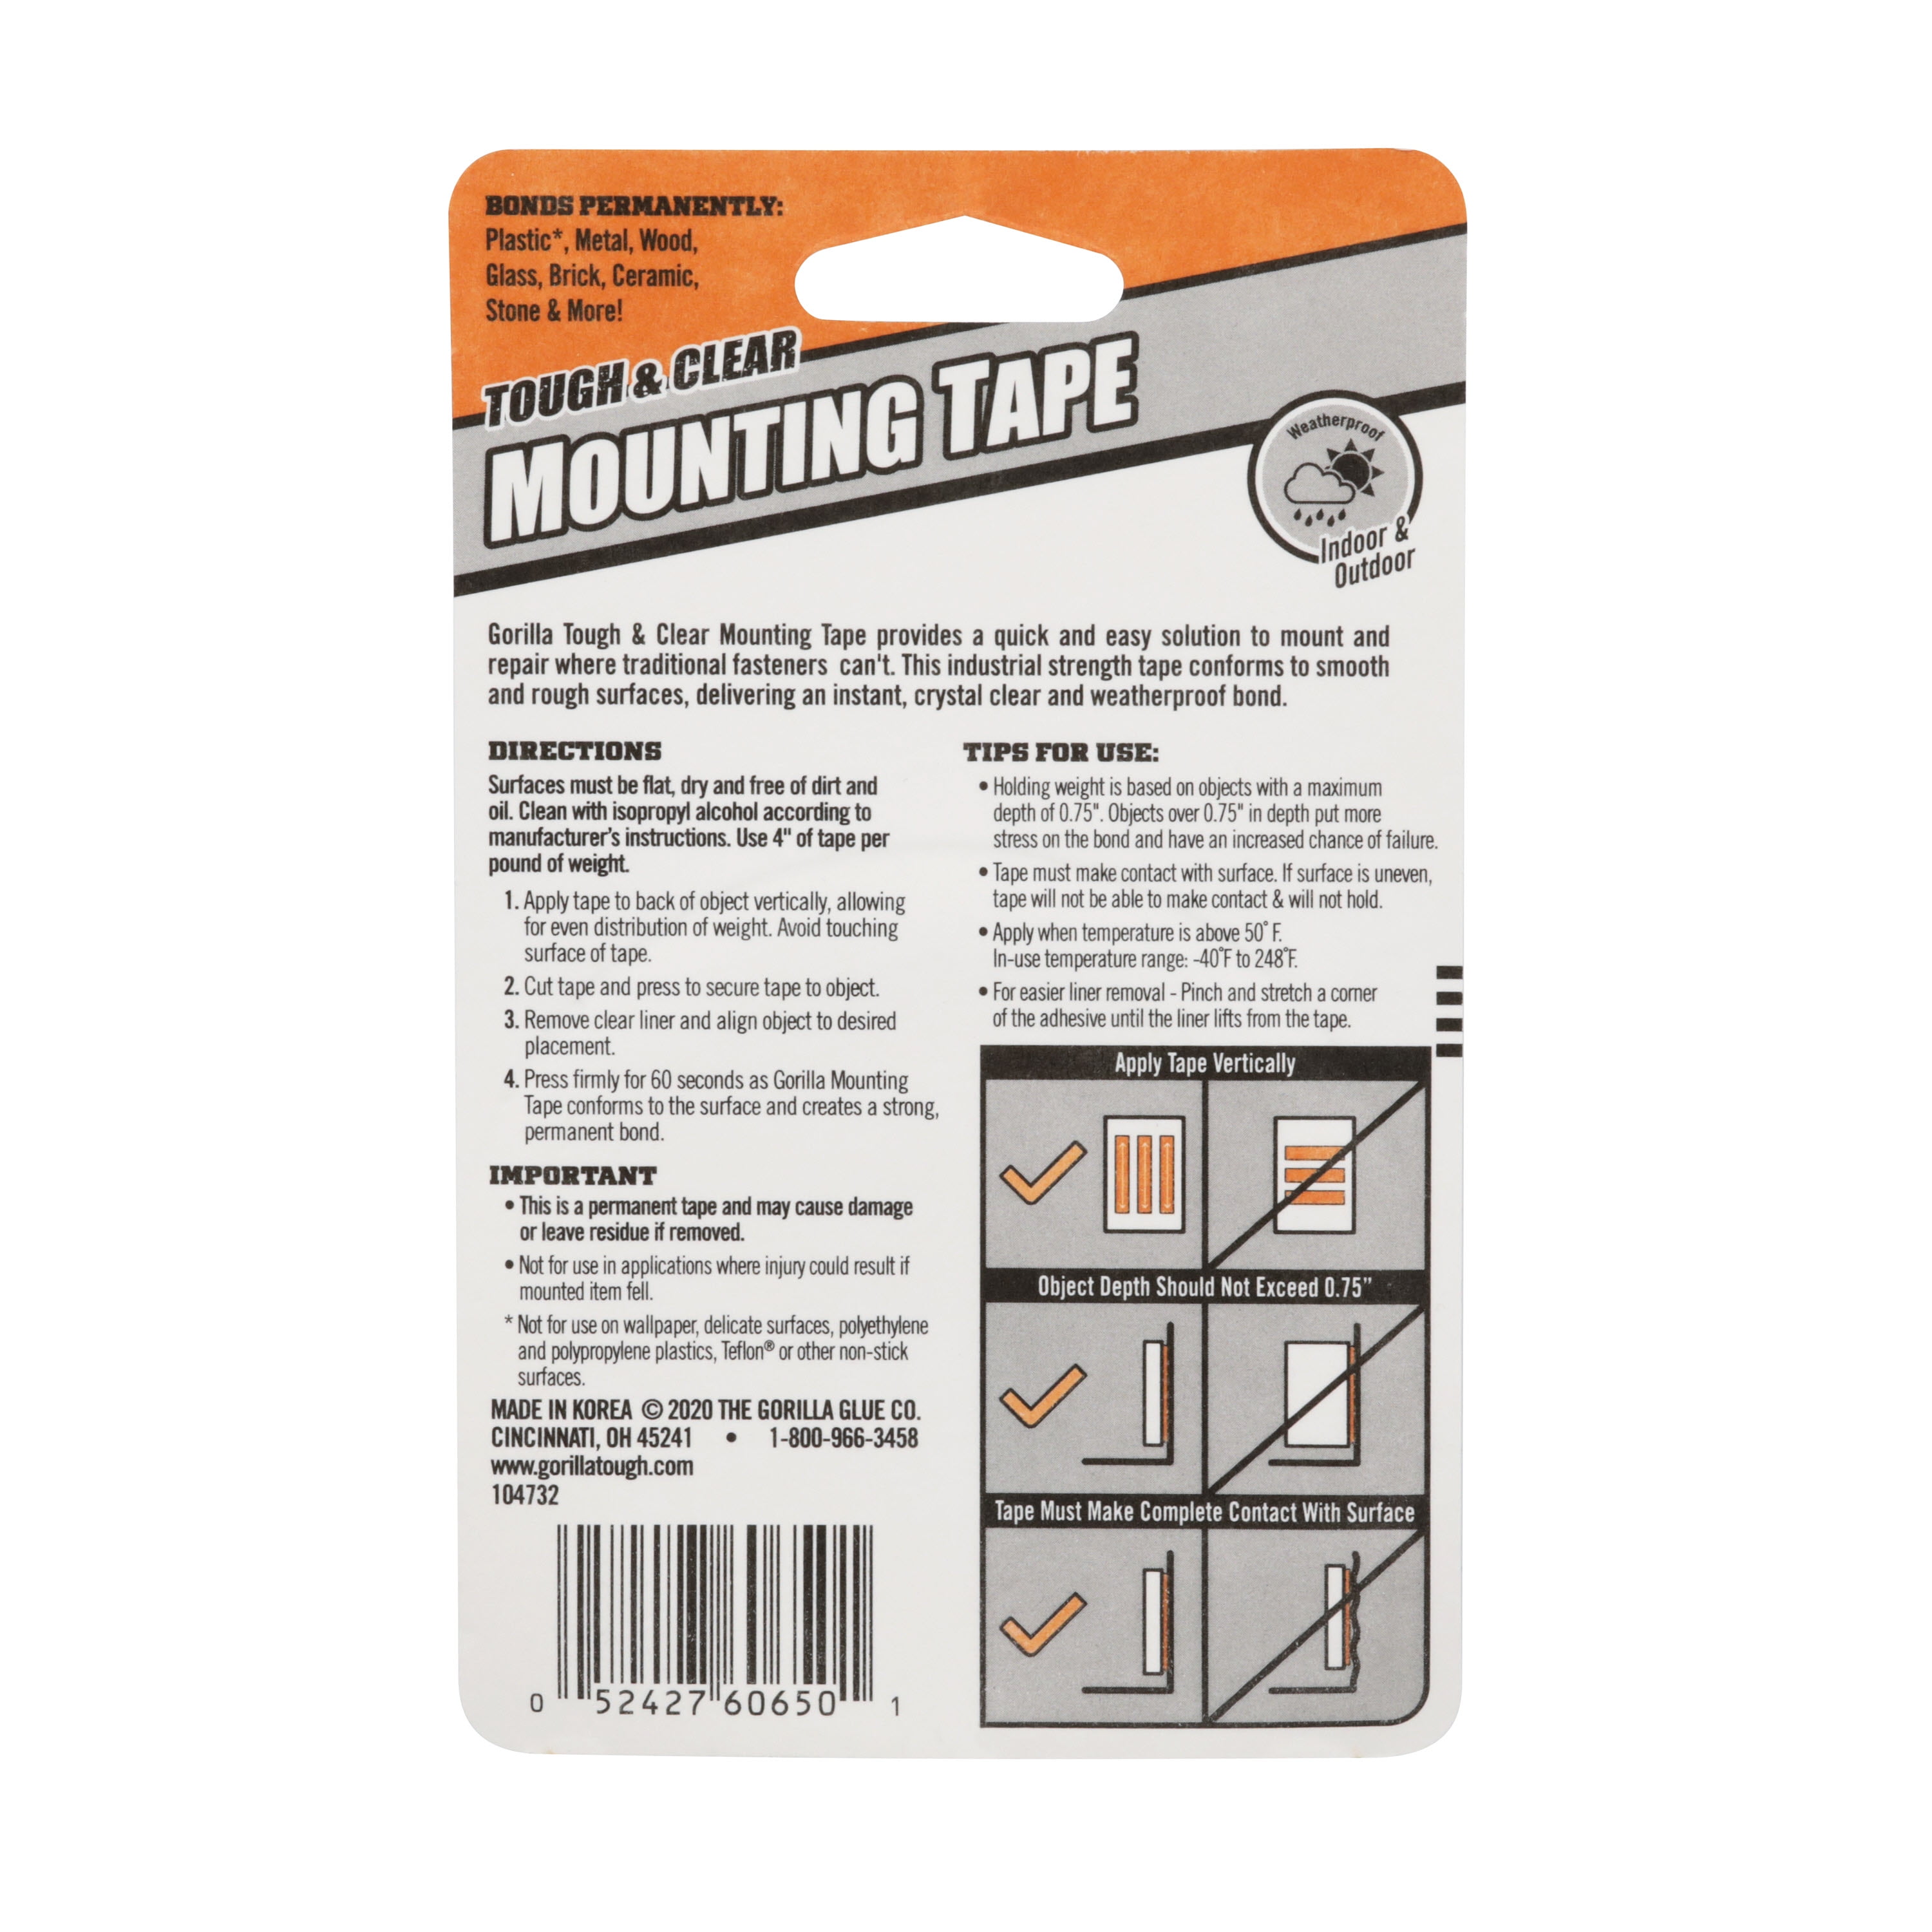 Gorilla Tough and Clear Mounting Tape Squares 1 in